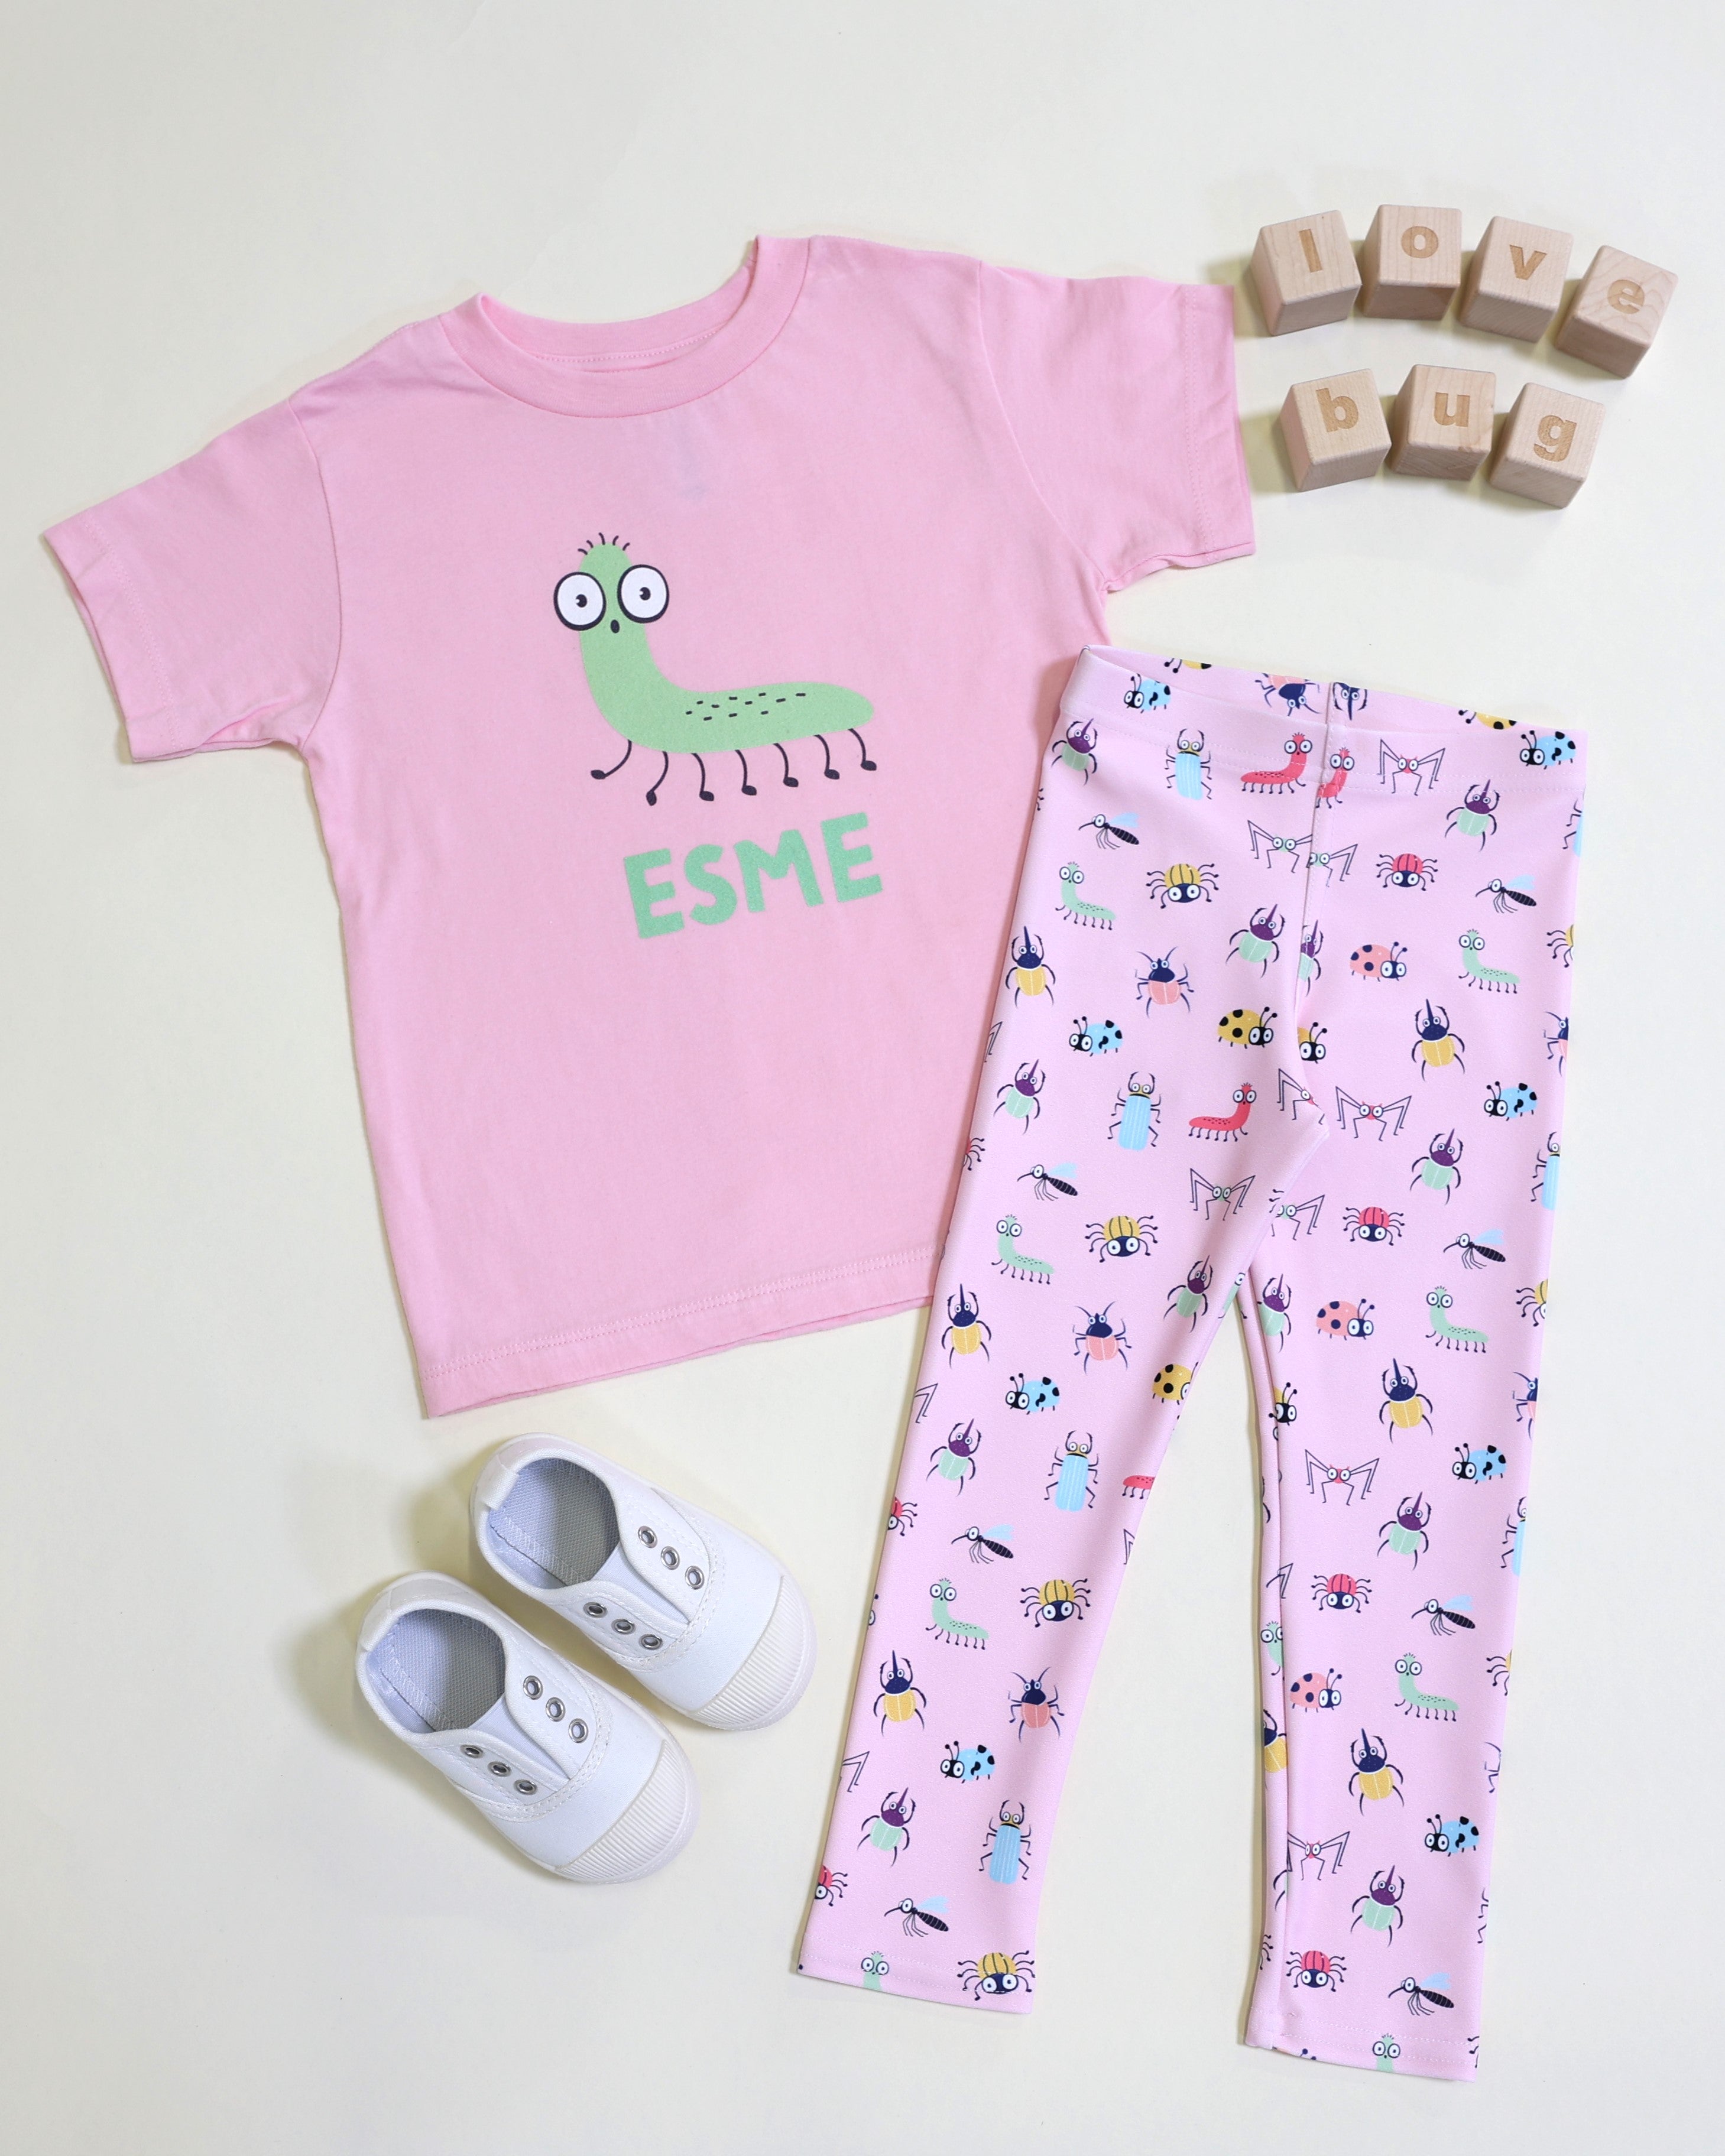 outfits for toddlers, cute designs for boys and girls